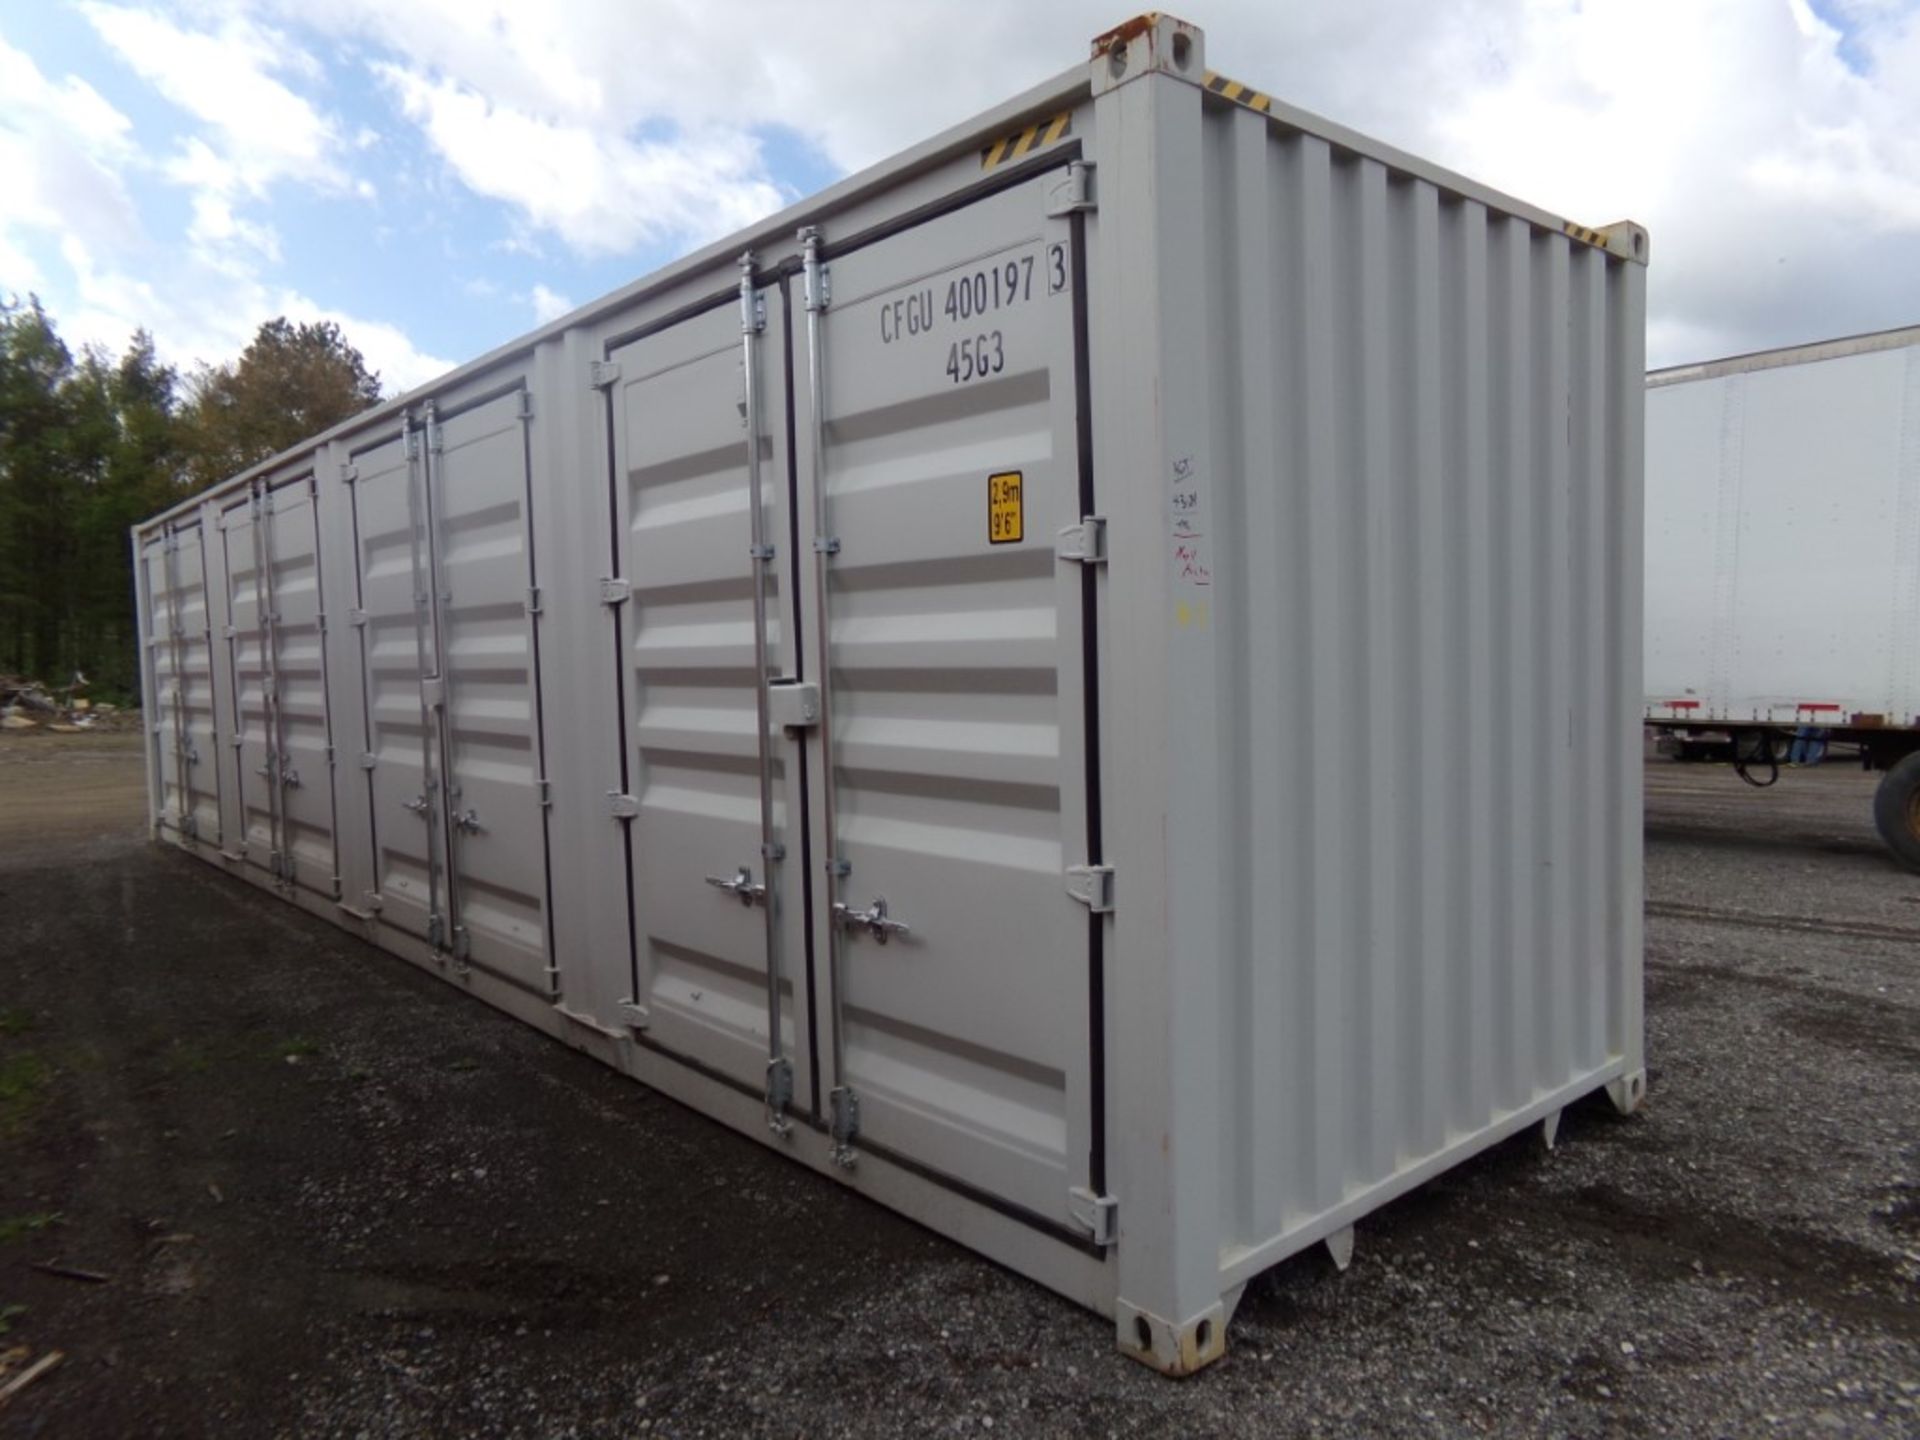 New 40' Container wirh (4) Side Access Doors and Barn Doors on 1 End, Cont. # CFGU4001973 - Image 3 of 5